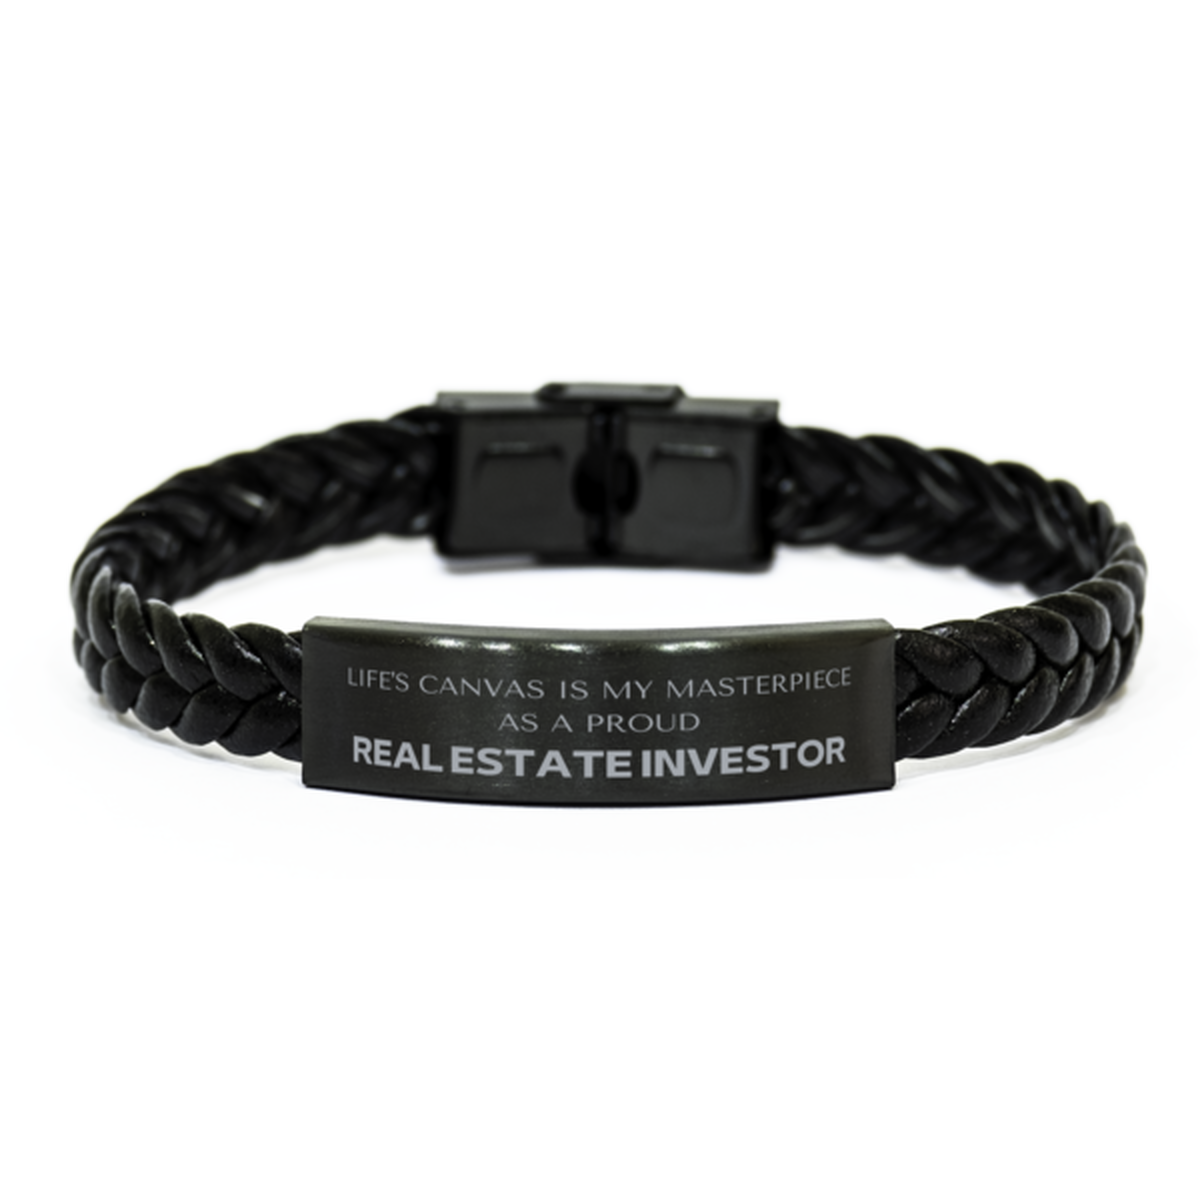 Proud Real Estate Investor Gifts, Life's canvas is my masterpiece, Epic Birthday Christmas Unique Braided Leather Bracelet For Real Estate Investor, Coworkers, Men, Women, Friends